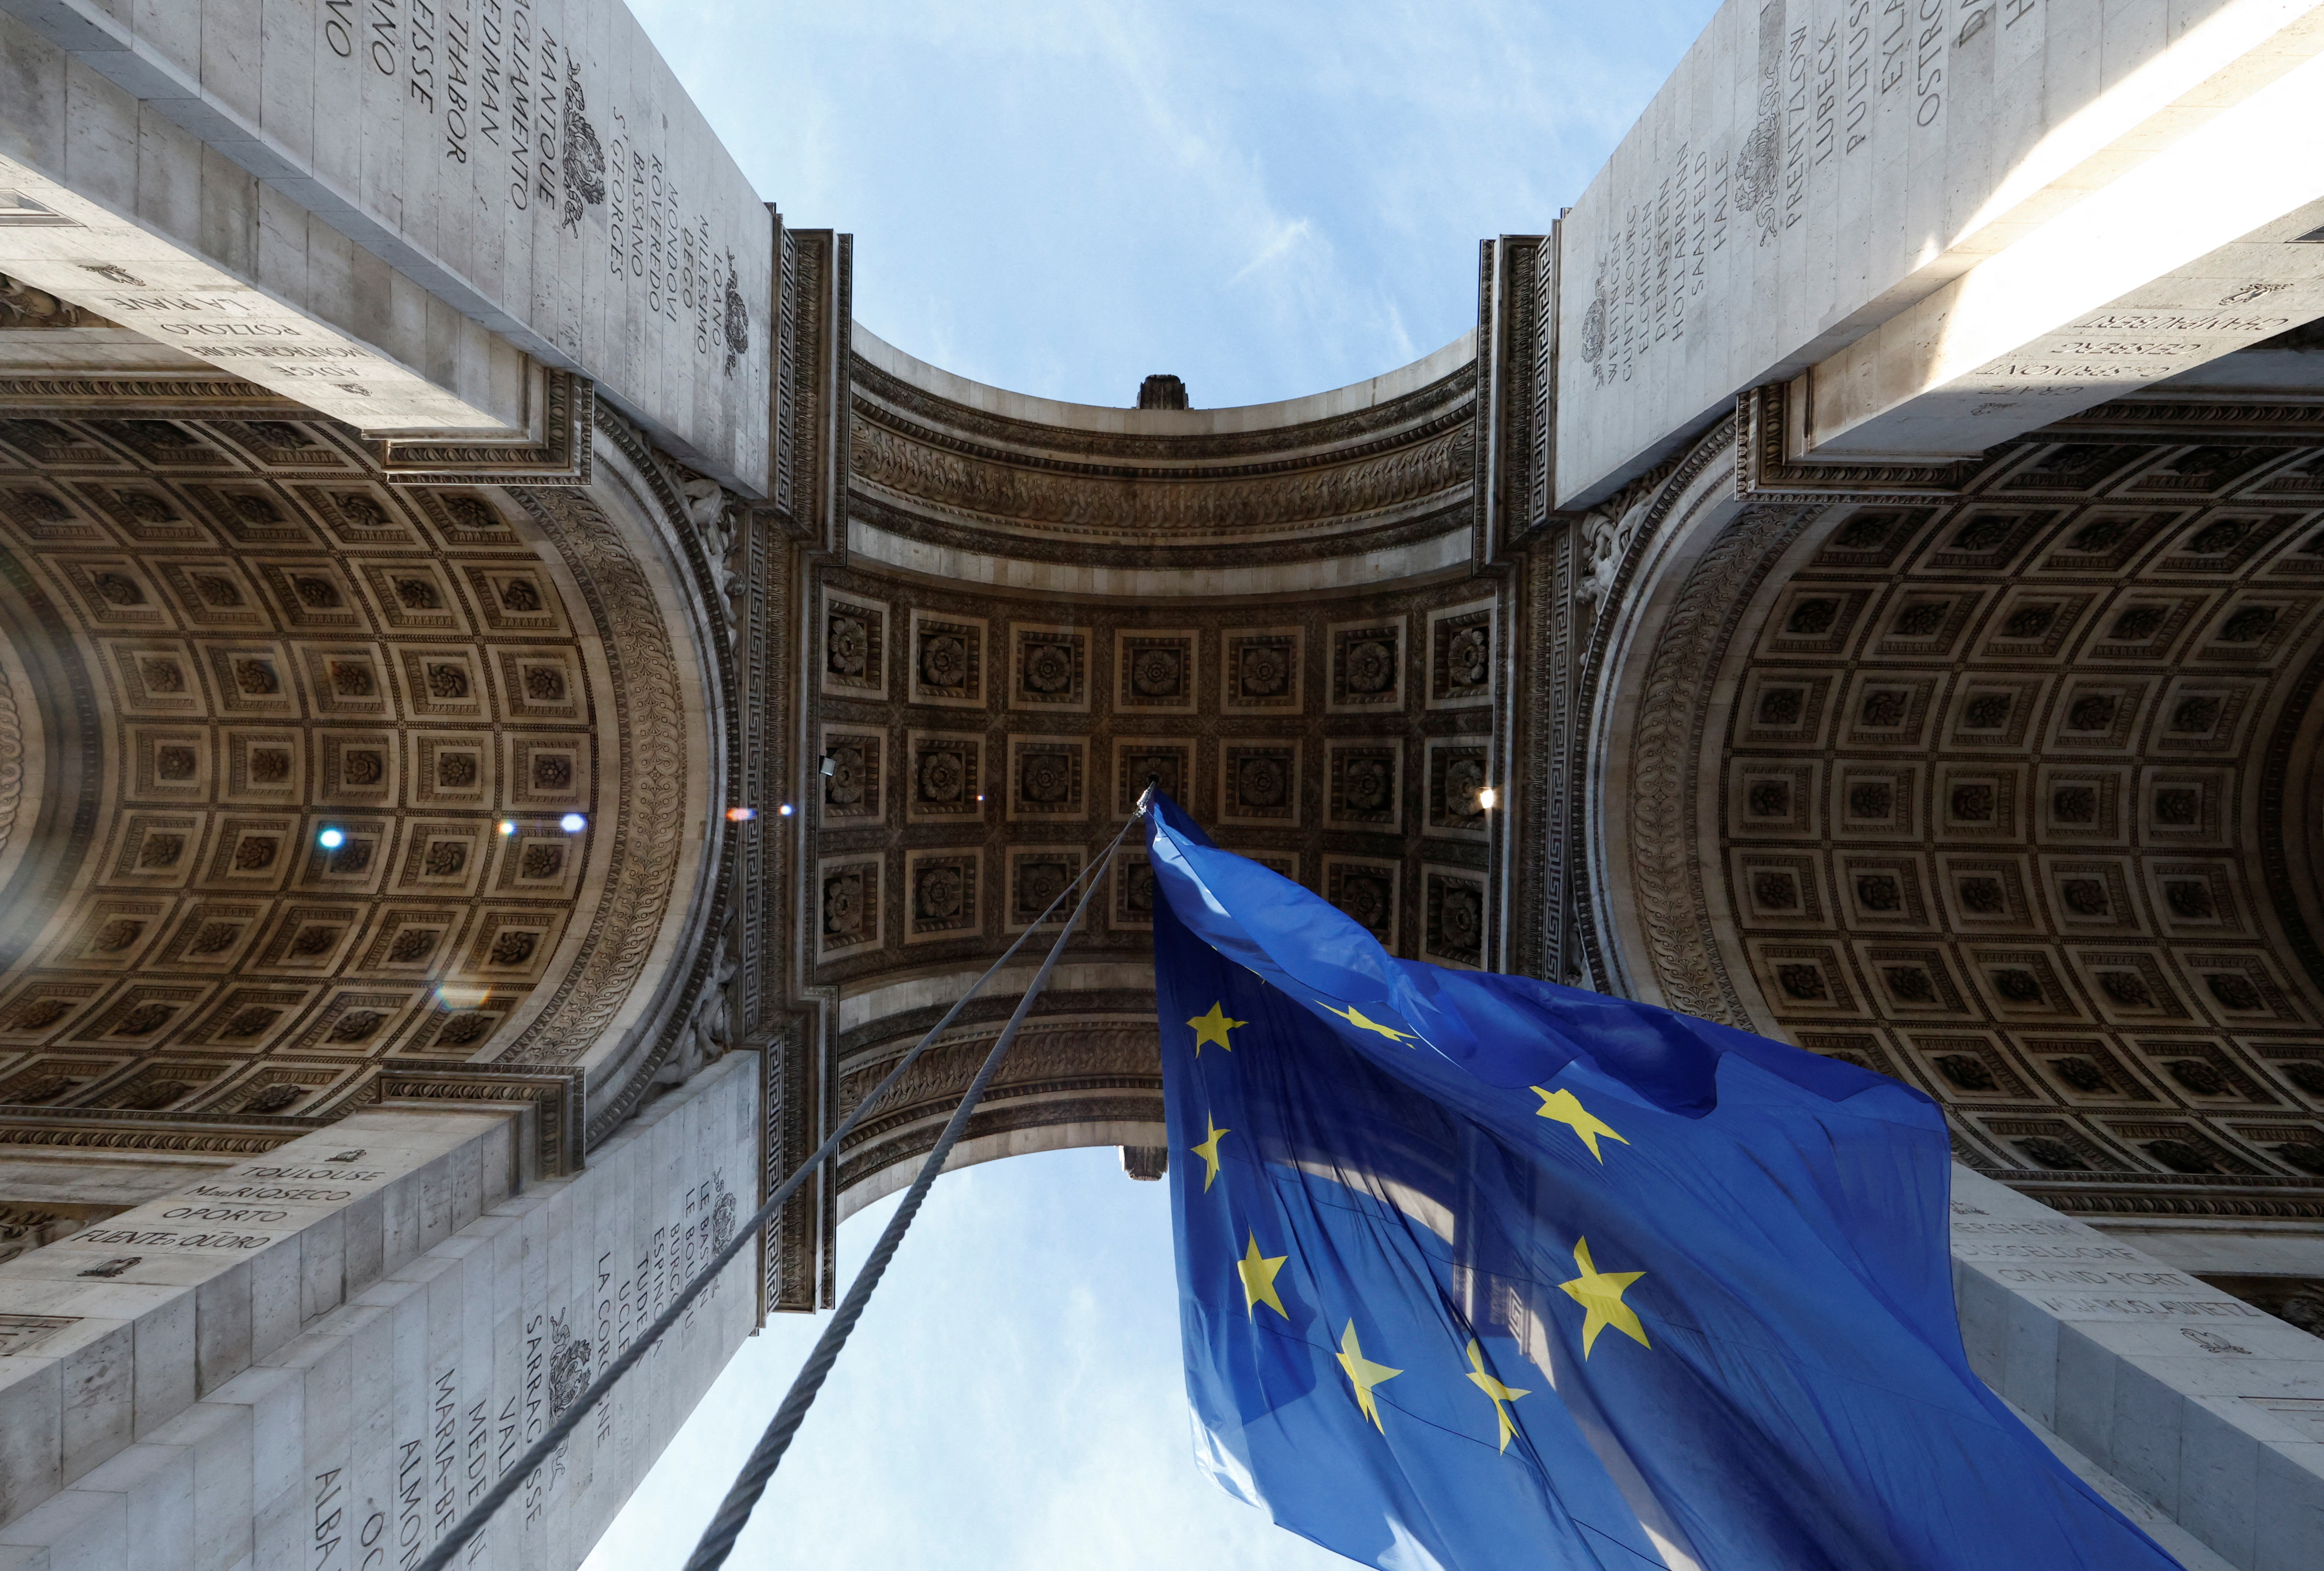 The European flag flies under the Arc de Triomphe to celebrate the start of the French presidency of the European Union, in Paris, France, January 1, 2022. REUTERS/Christian Hartmann